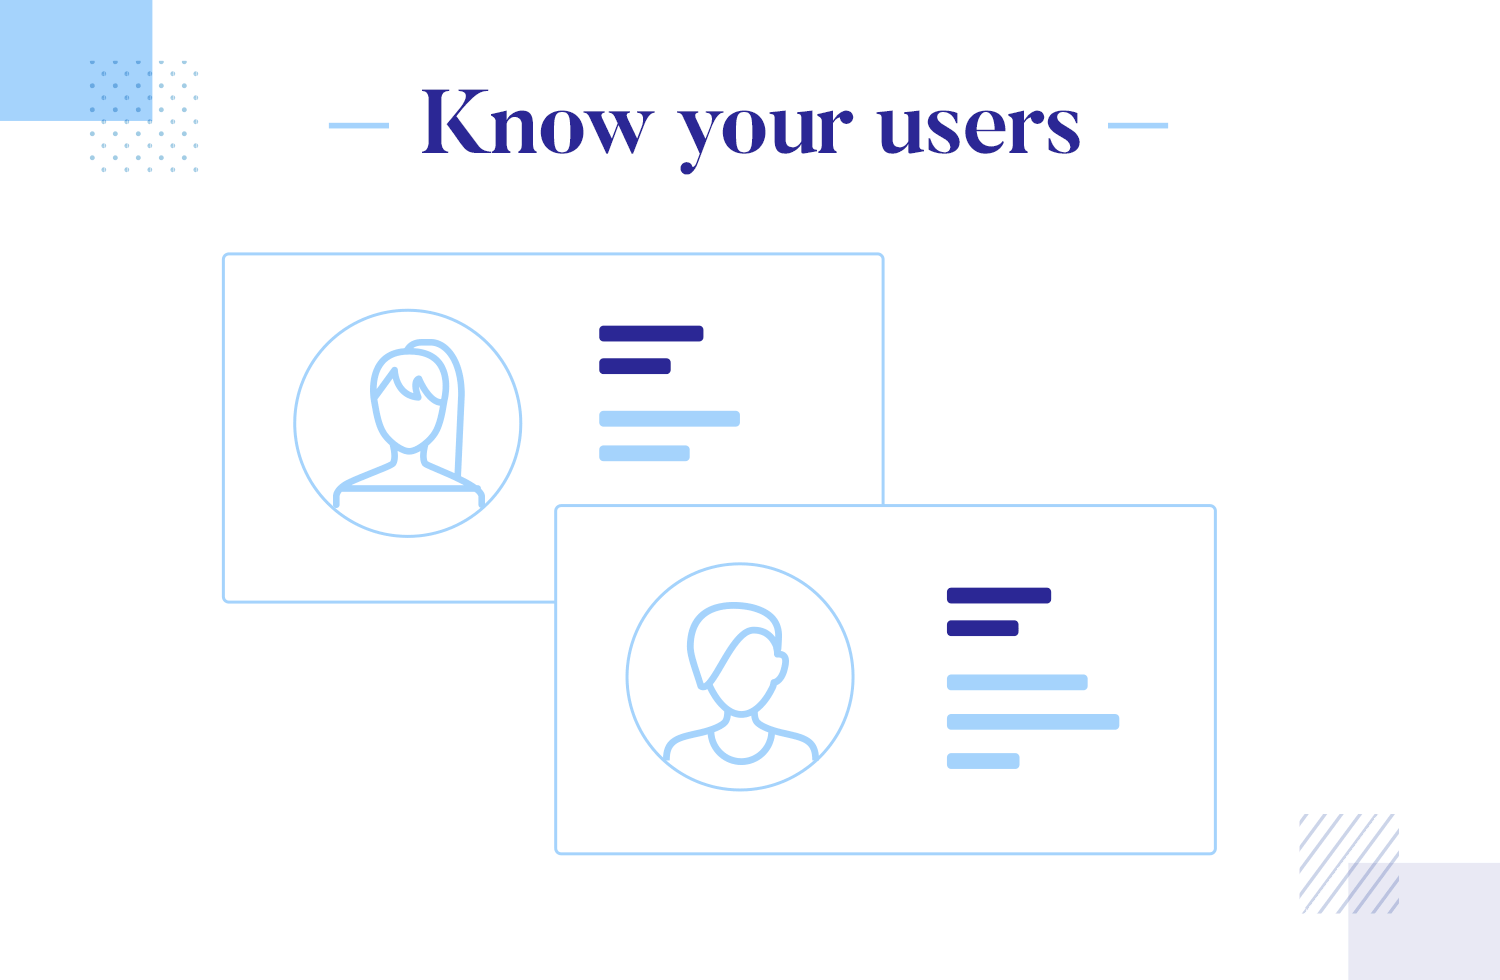 User onboarding best practices - know your users